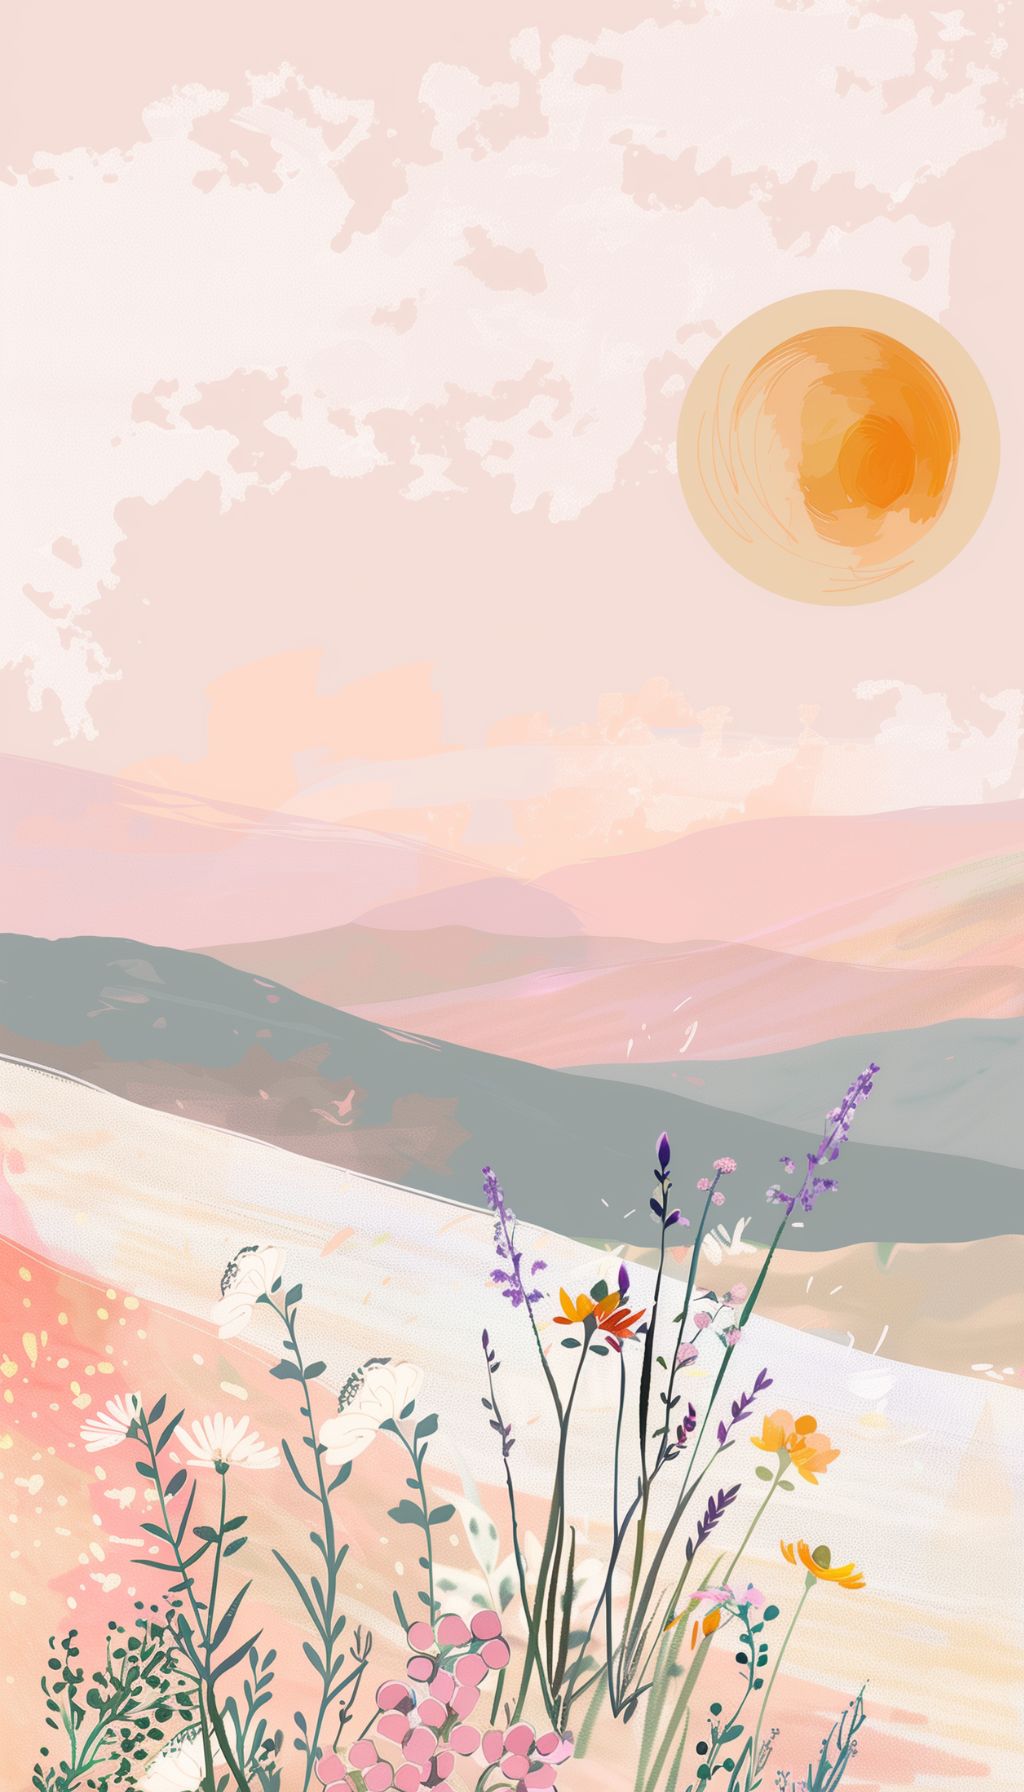 Digital illustration of a pastel sunrise over gentle hills, decorated with various wildflowers in soft colors, ideal for iPhone wallpaper or lock screen.